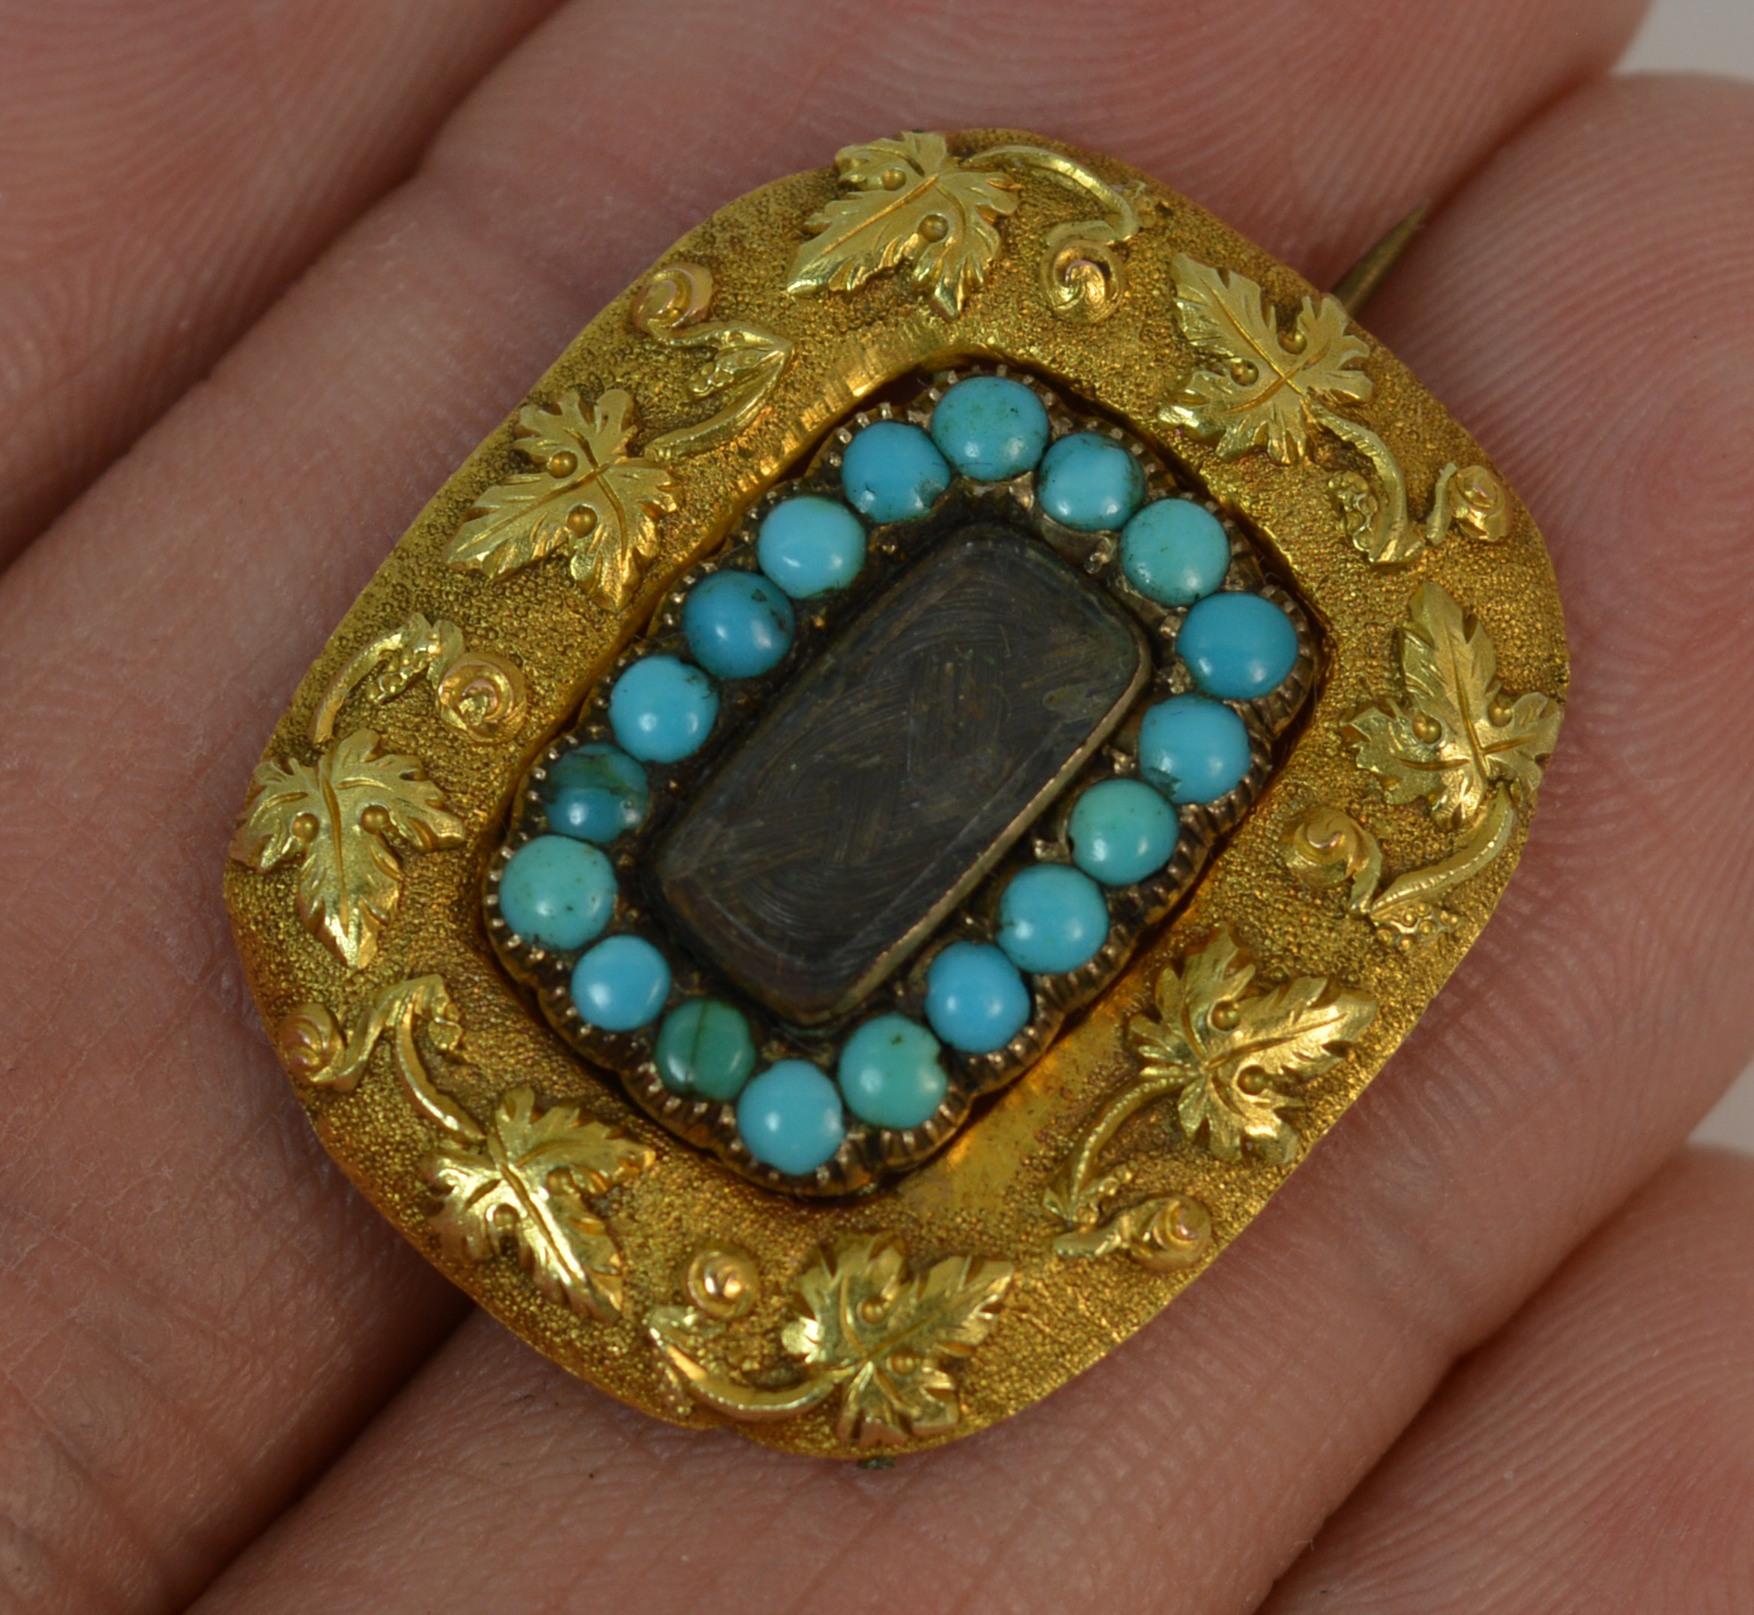 
A beautiful Georgian period brooch.

Solid 18 carat gold brooch example.

Designed with a locket panel of braided hair to the centre and full turquoise set border surrounding. The edge finished in 18ct gold with an ivy leaf pattern